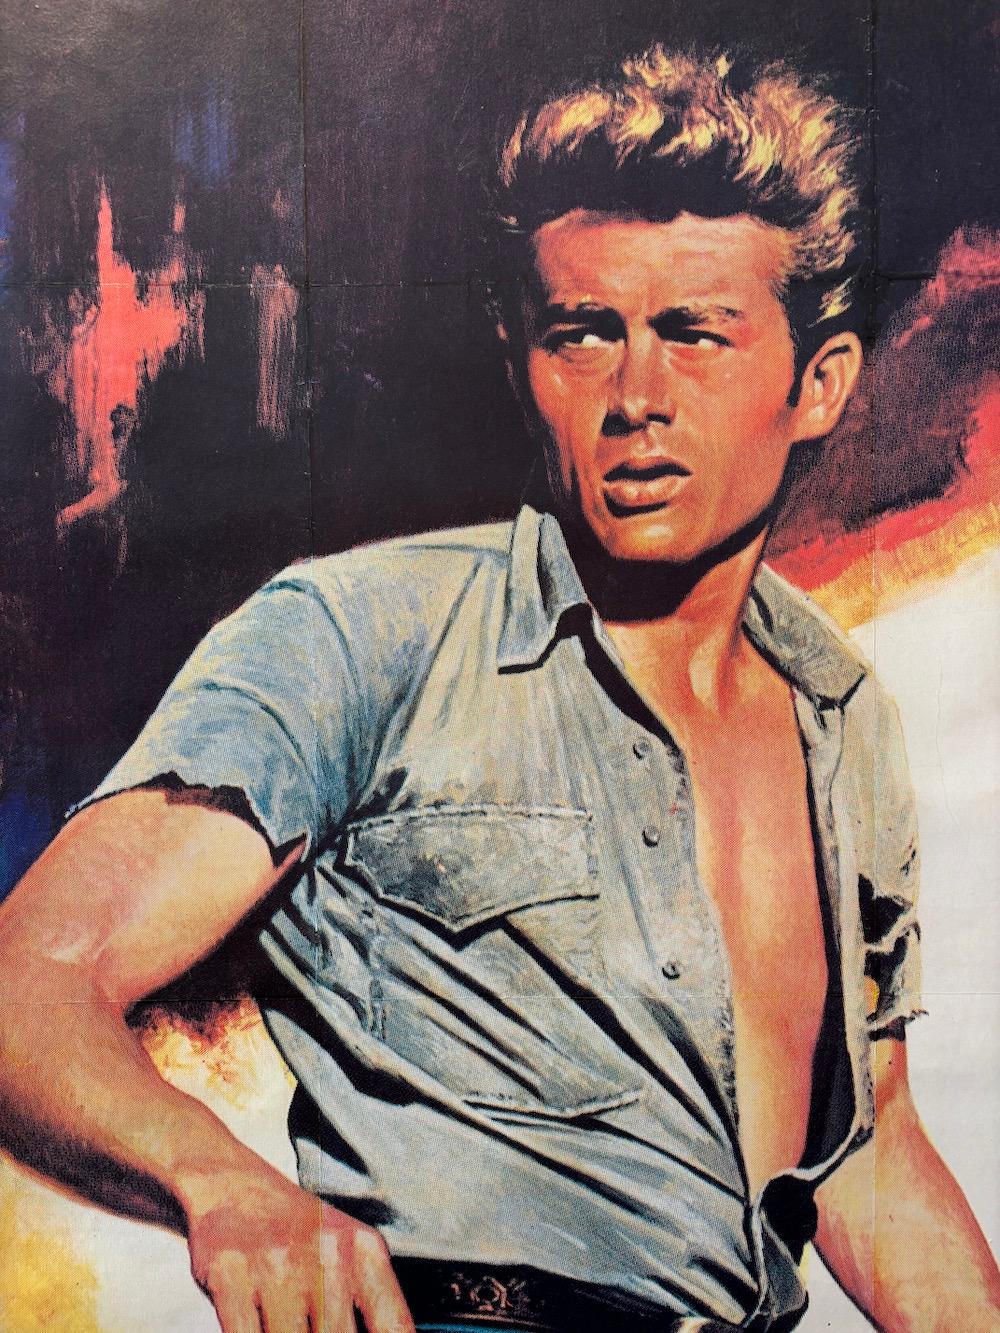 'Rebel Without a Cause' Original Vintage Retro French Film Poster, JAMES DEAN

This vintage film poster is a true gem for any movie enthusiast. Featuring the iconic film 'Rebel Without a Cause', this piece was created in France in 1975. The artwork